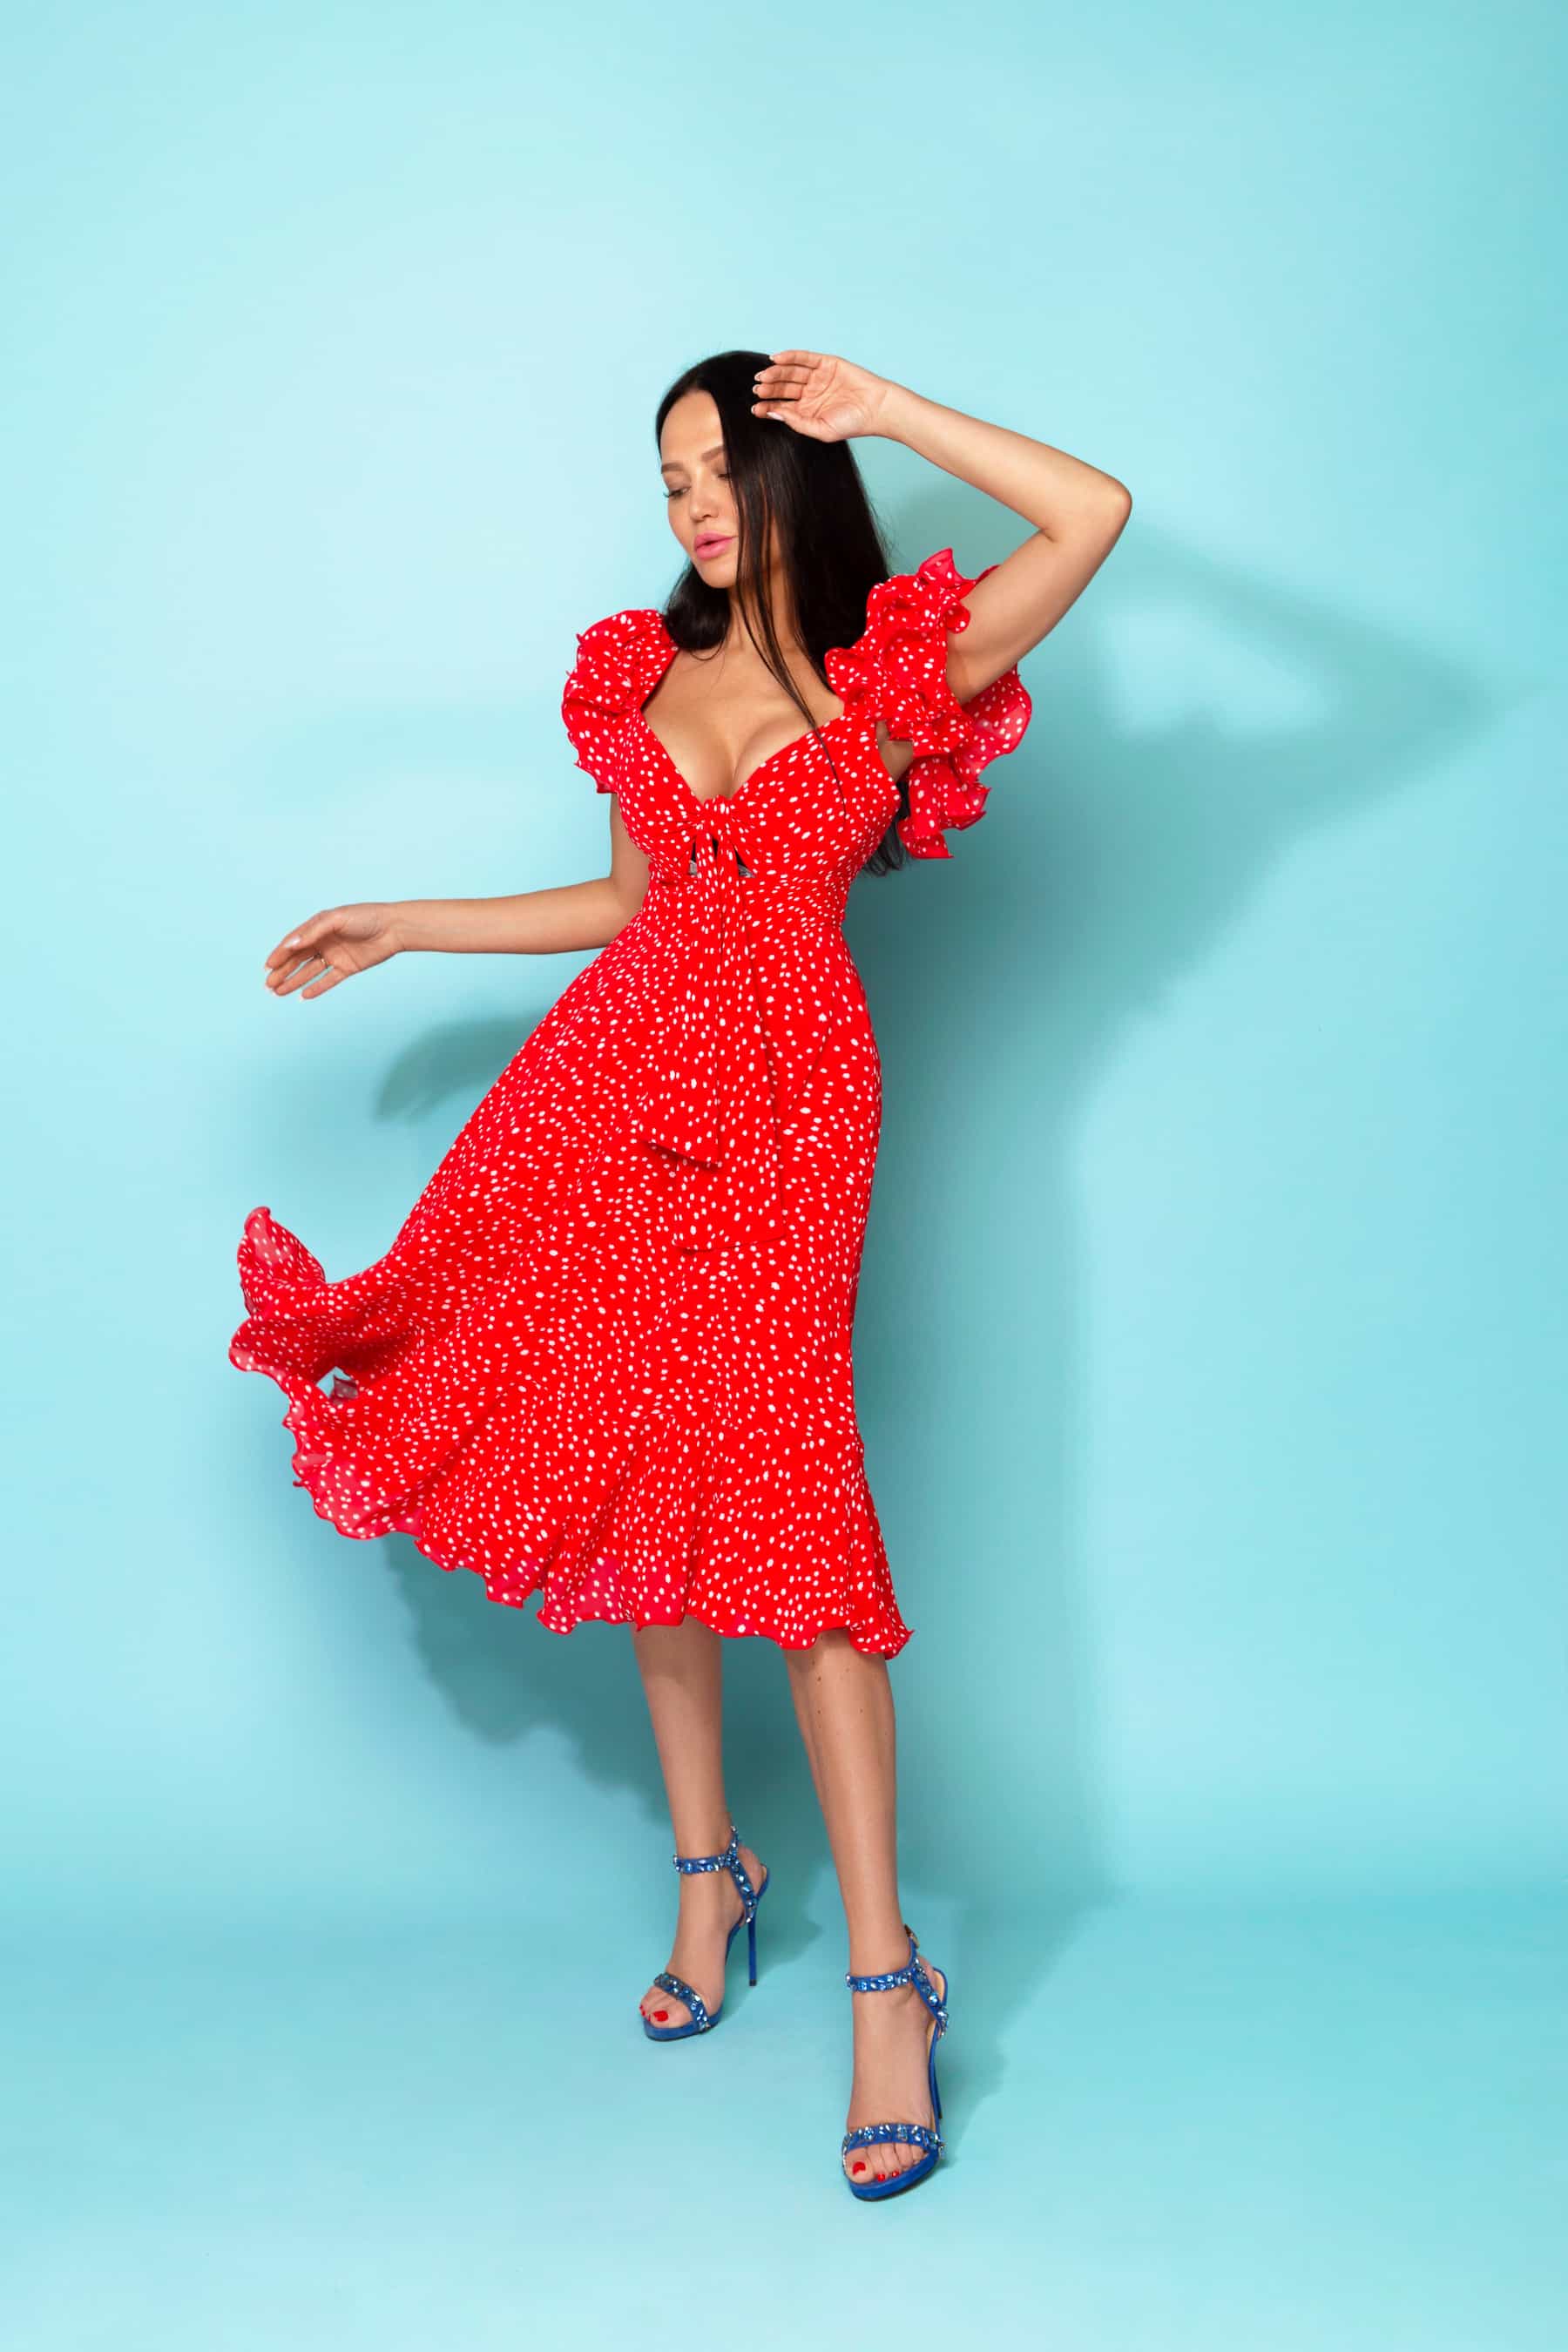 Red dress from chiffon with ruffle sleeves